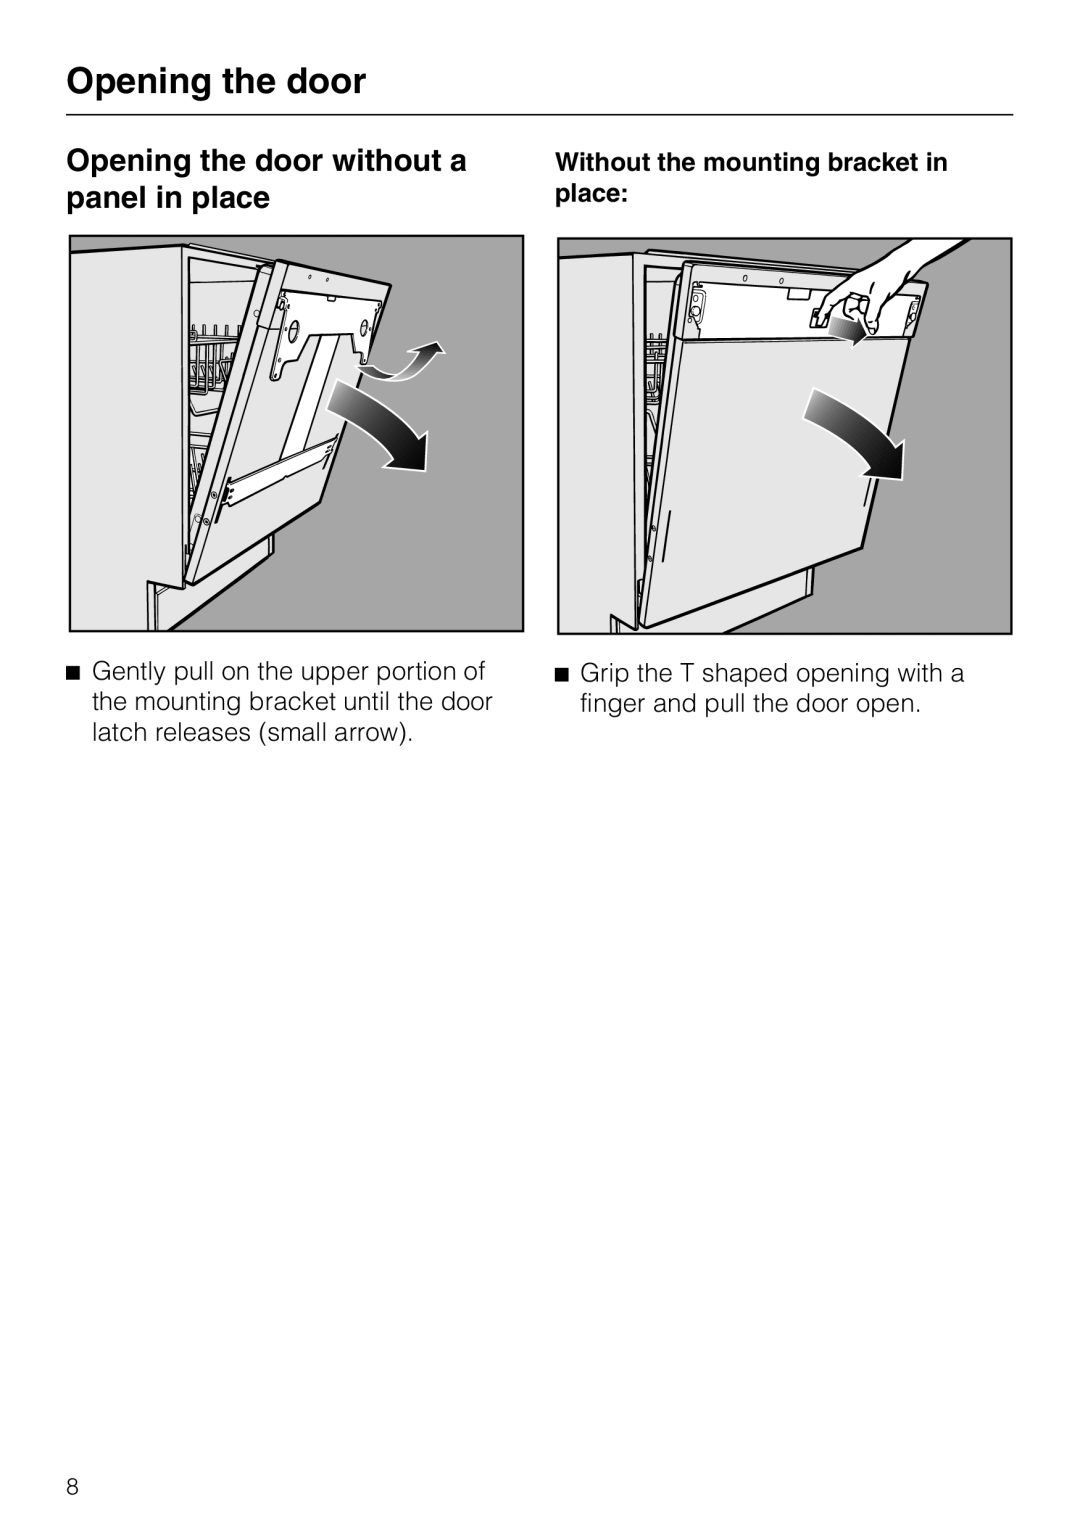 Miele HG01 installation instructions Opening the door without a panel in place, Without the mounting bracket in place 